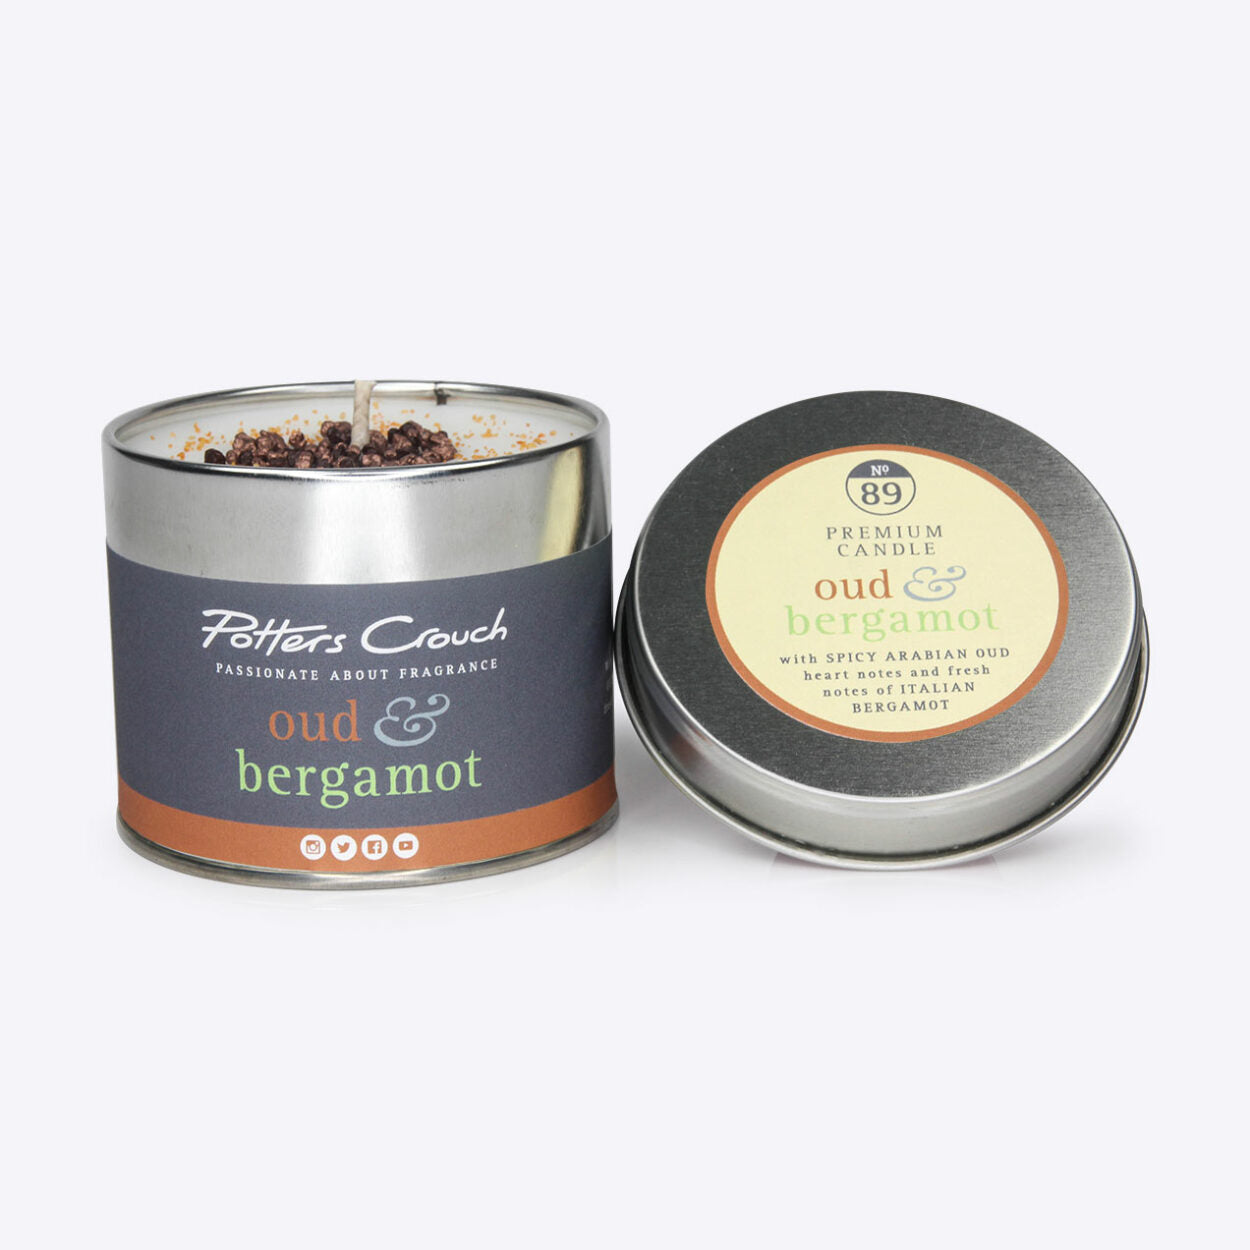 Potters Crouch Oud & Bergamot Scented Candle in a Tin